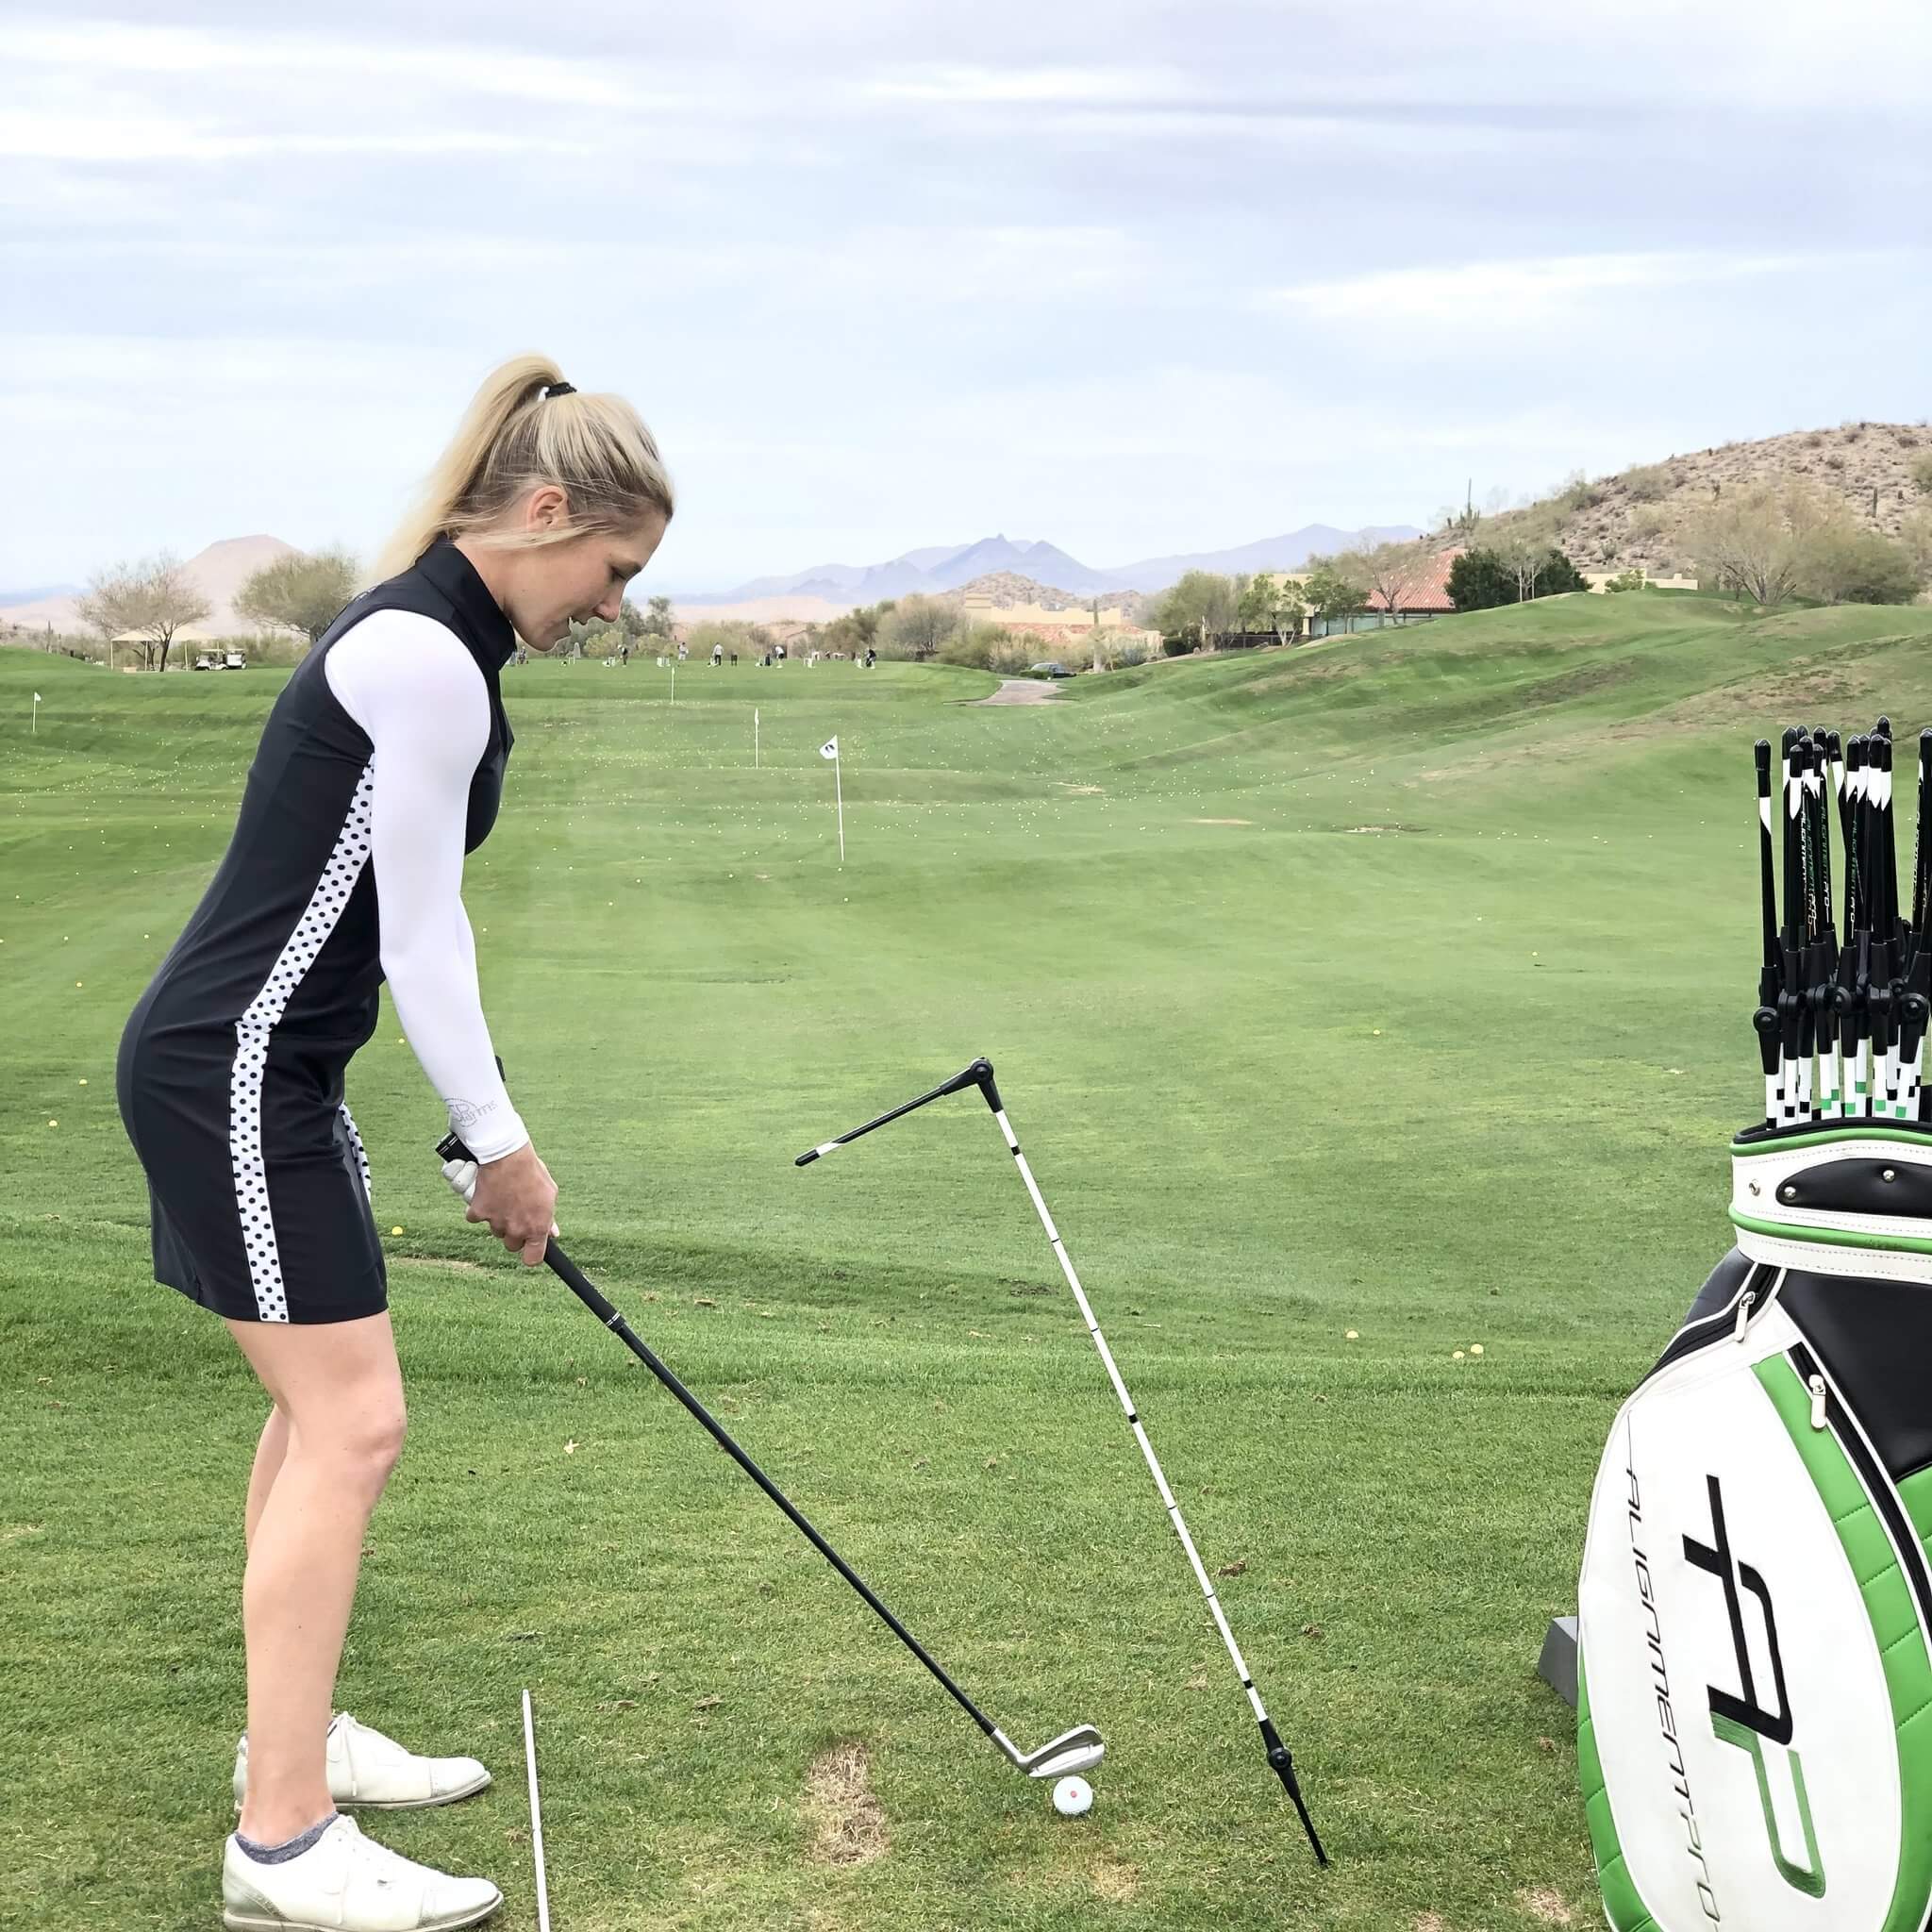 All-in-one golf training aid that can be used for putting lines, swing path, chipping and many more golf drills to improve your game. The best part about it is that it is simple yet effective and easily fits into one of the slots in your golf bag